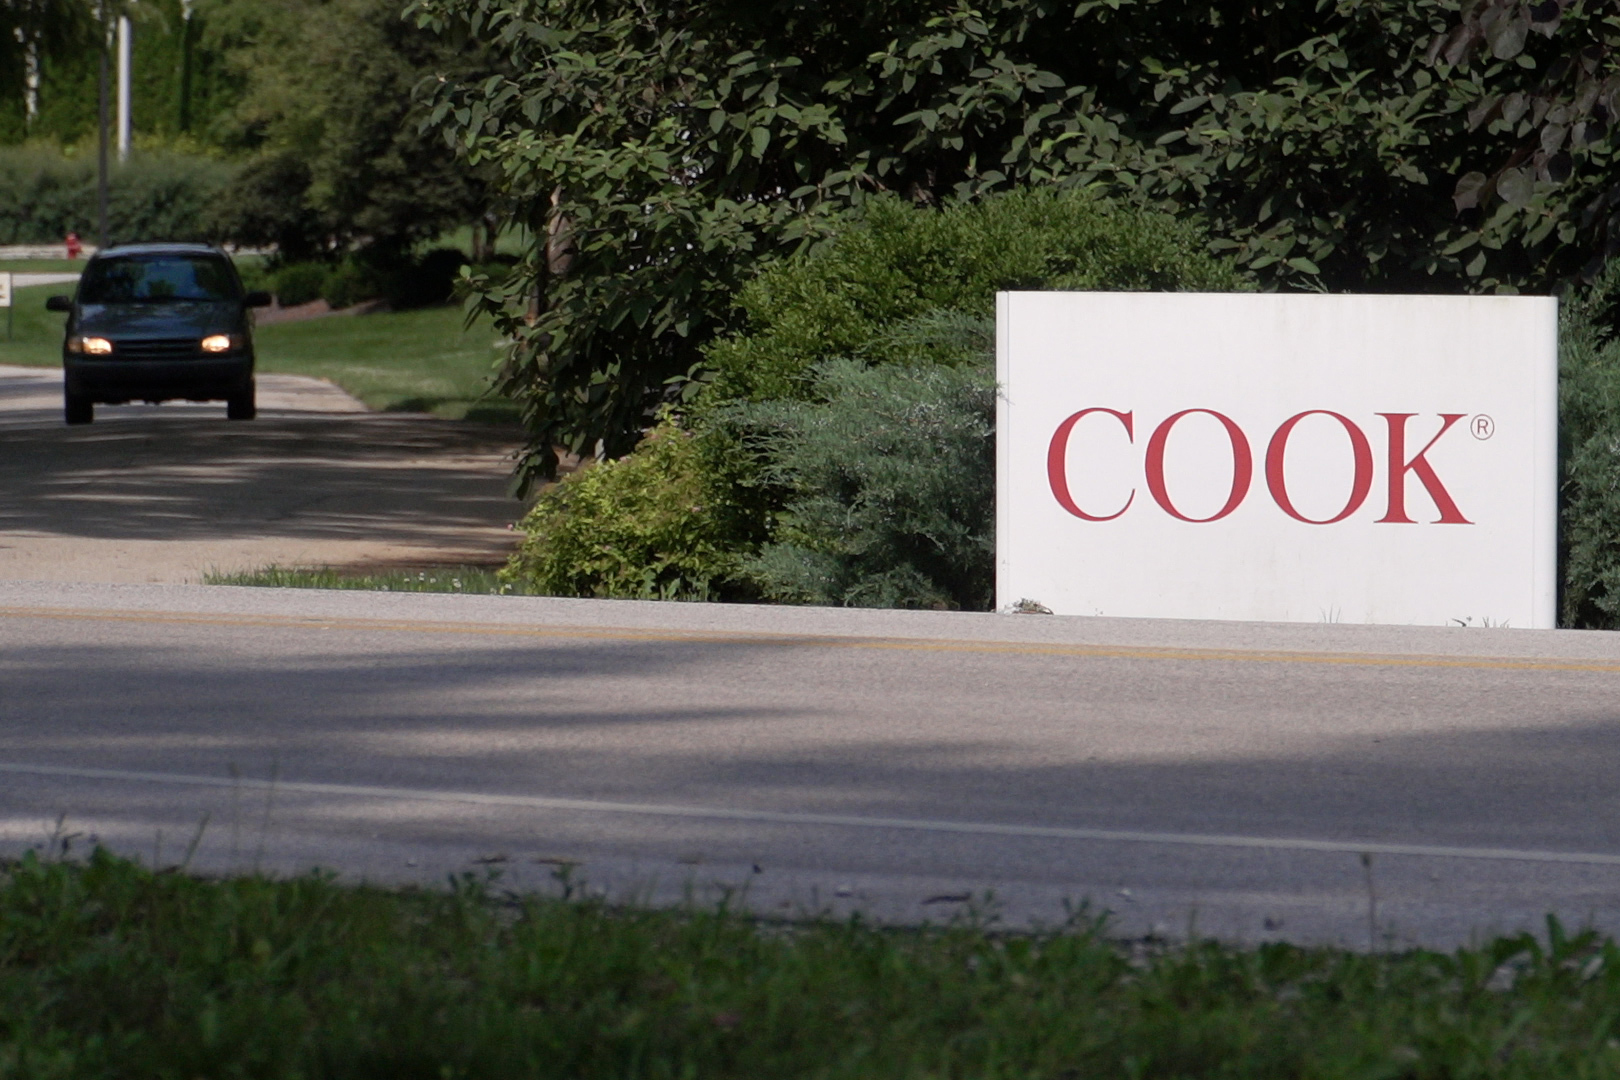 The entrance to Cook Group Inc. in Ellettsville. A clean white sign sits on the side of the road. Medium red letters spell out Cook in all caps. To the left of the sign, a mid-sized vehicle with its lights on drives up a path. Behind the sign, green foliage. Image credit: Alan Mbathi, IPB News